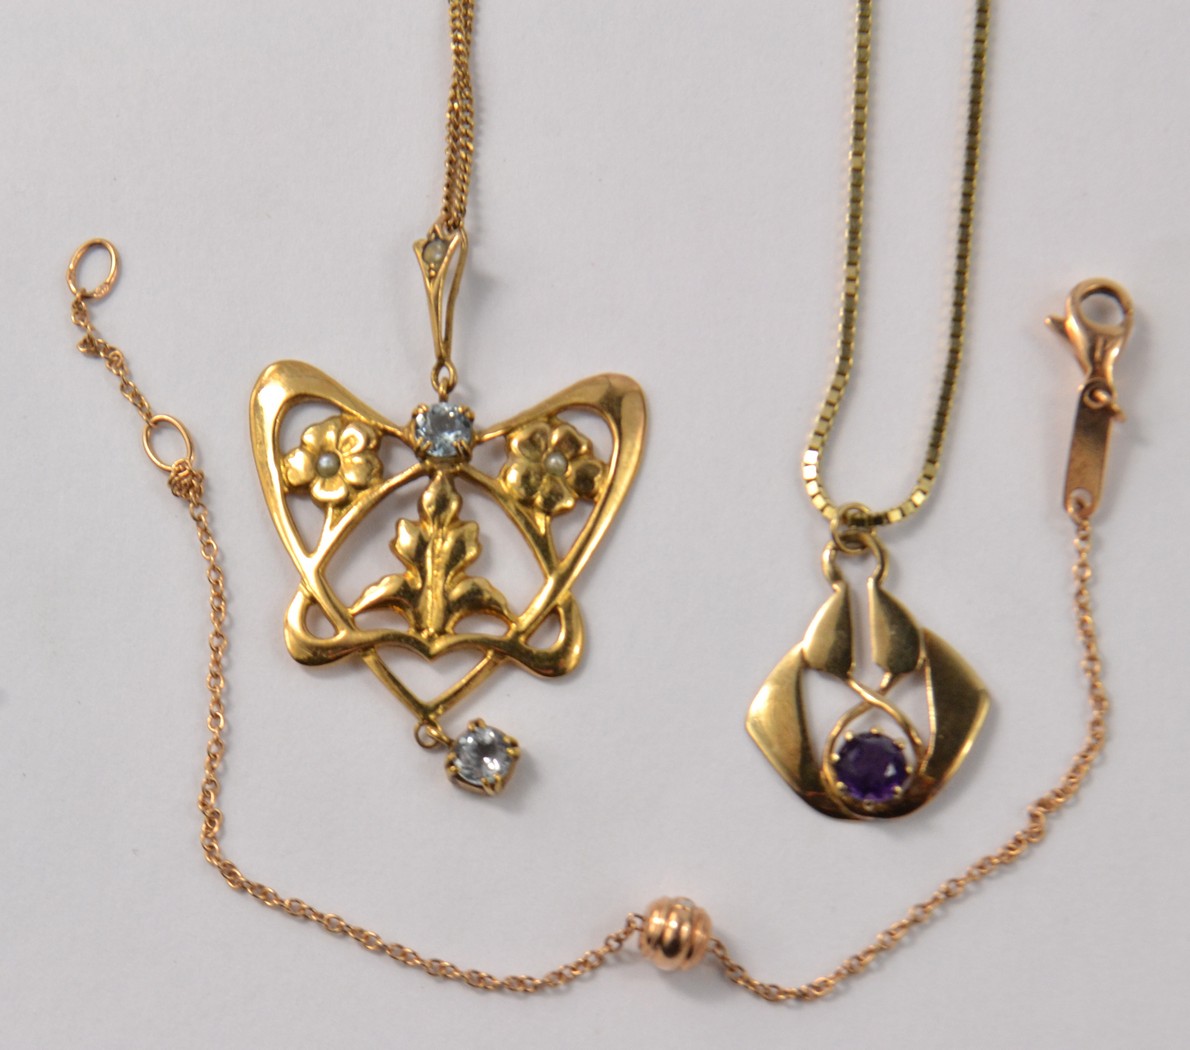 Selection of gold jewellery to include 2 necklaces with pendants and a bracelet - Image 2 of 11